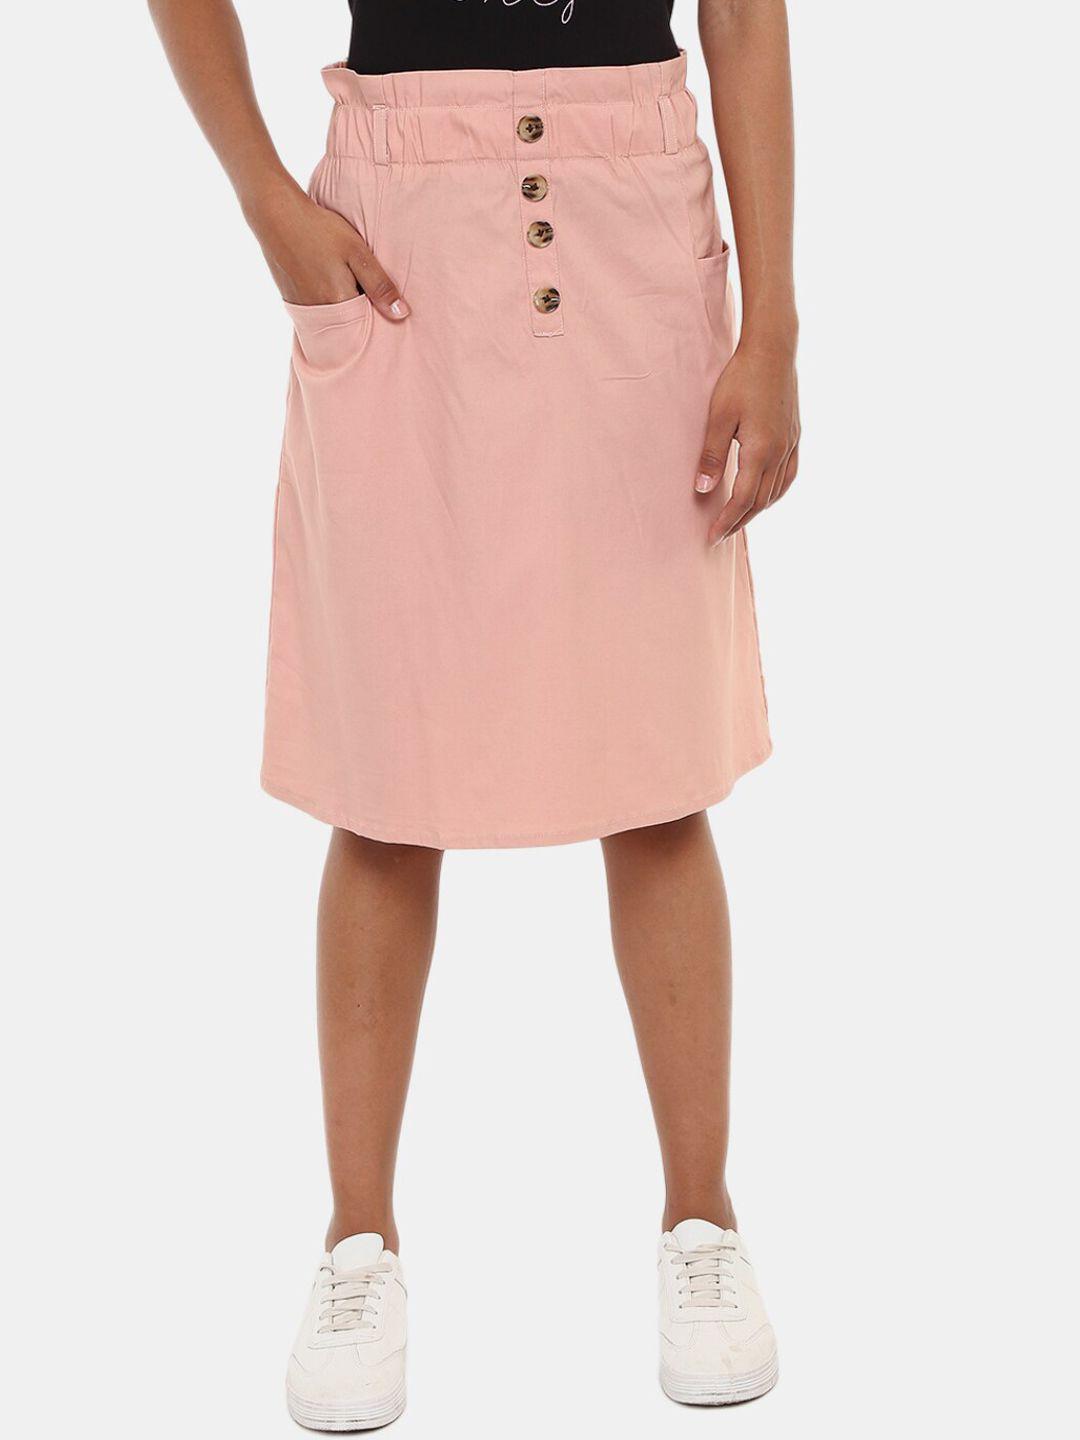 v-mart women peach-colored solid pure cotton straight knee-length skirt